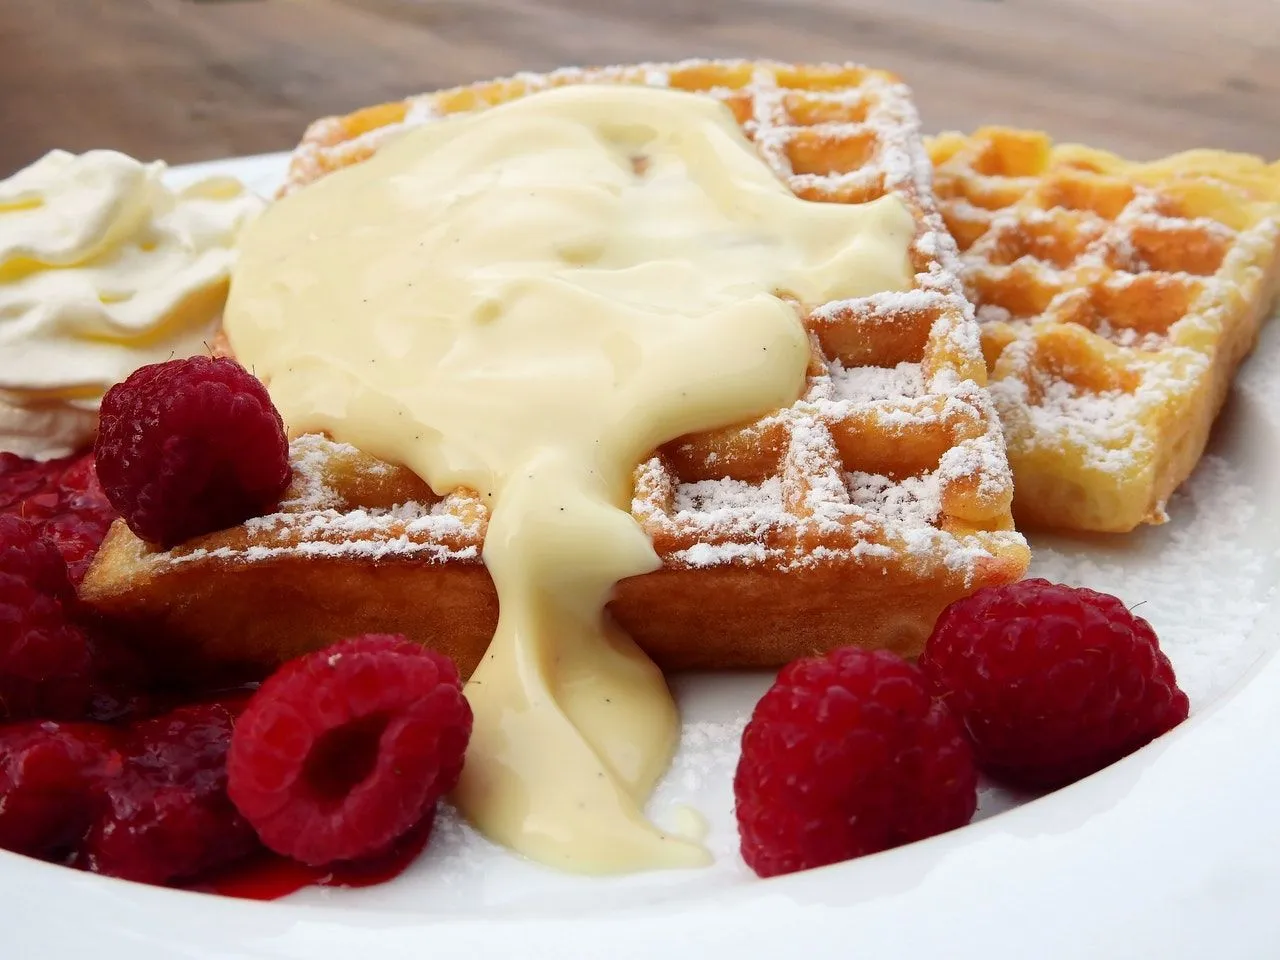 Waffles are one of the most delicious dishes of all time.